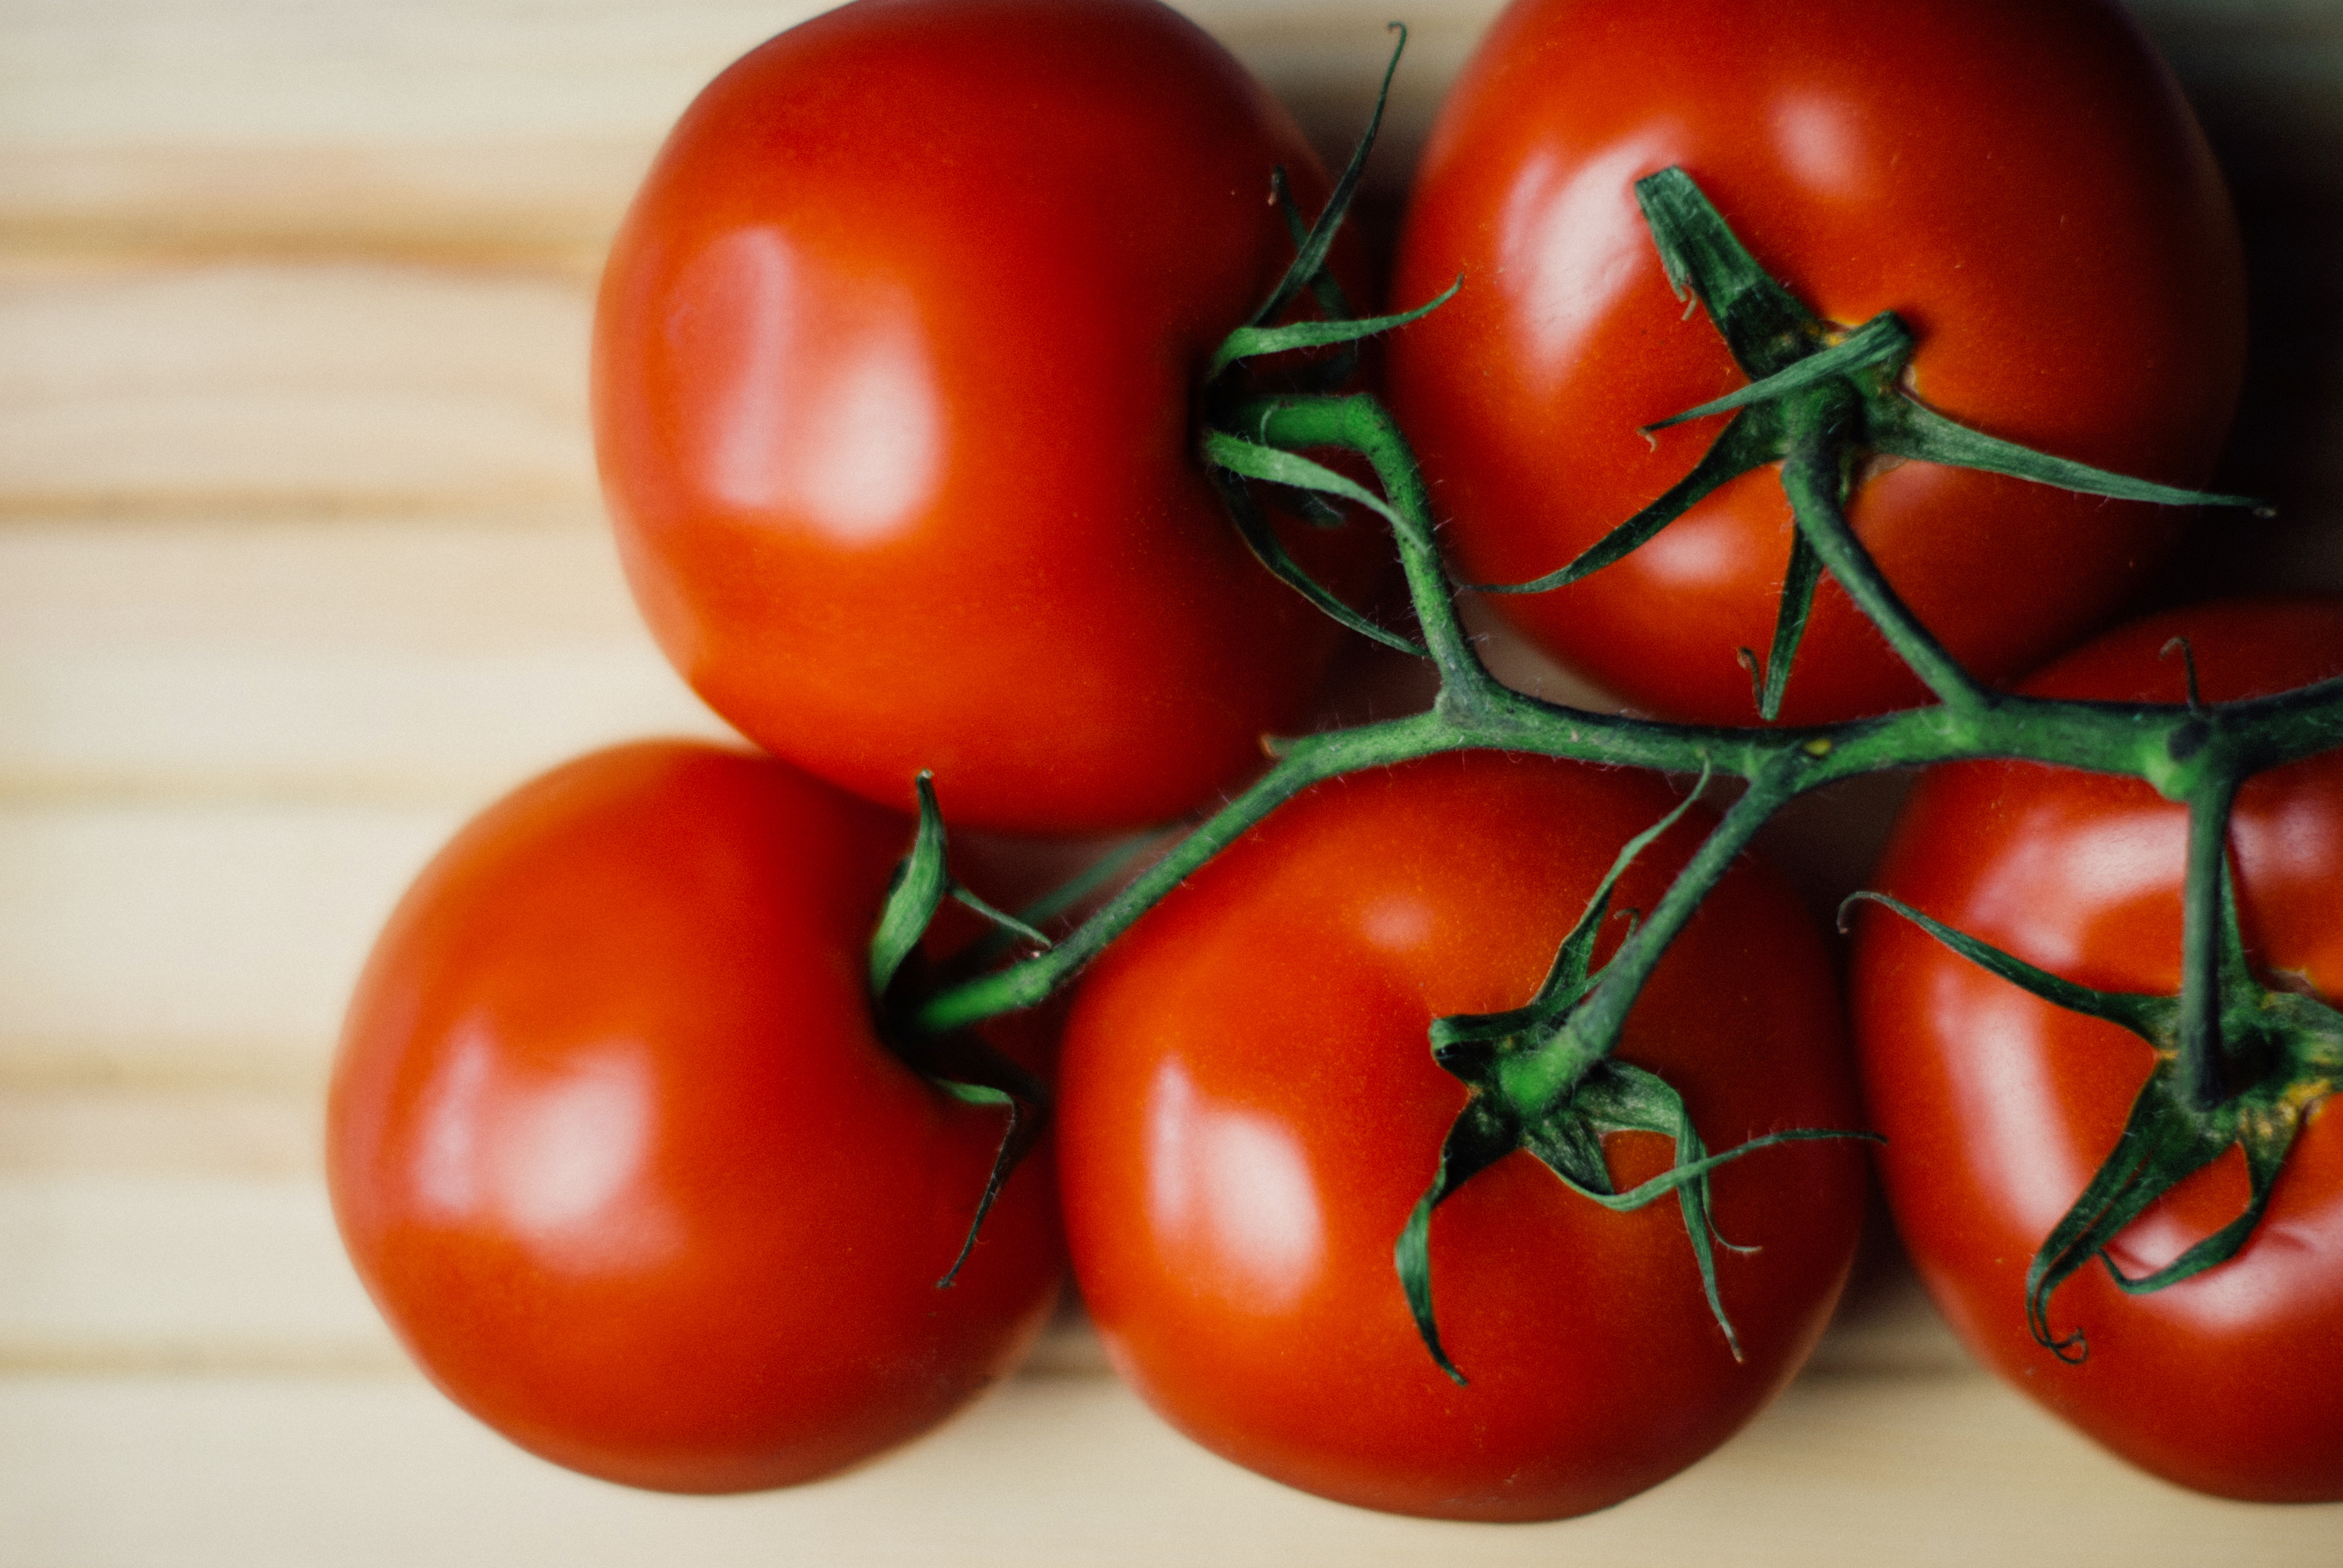 Are homegrown tomatoes really better than standard supermarket tomatoes? 